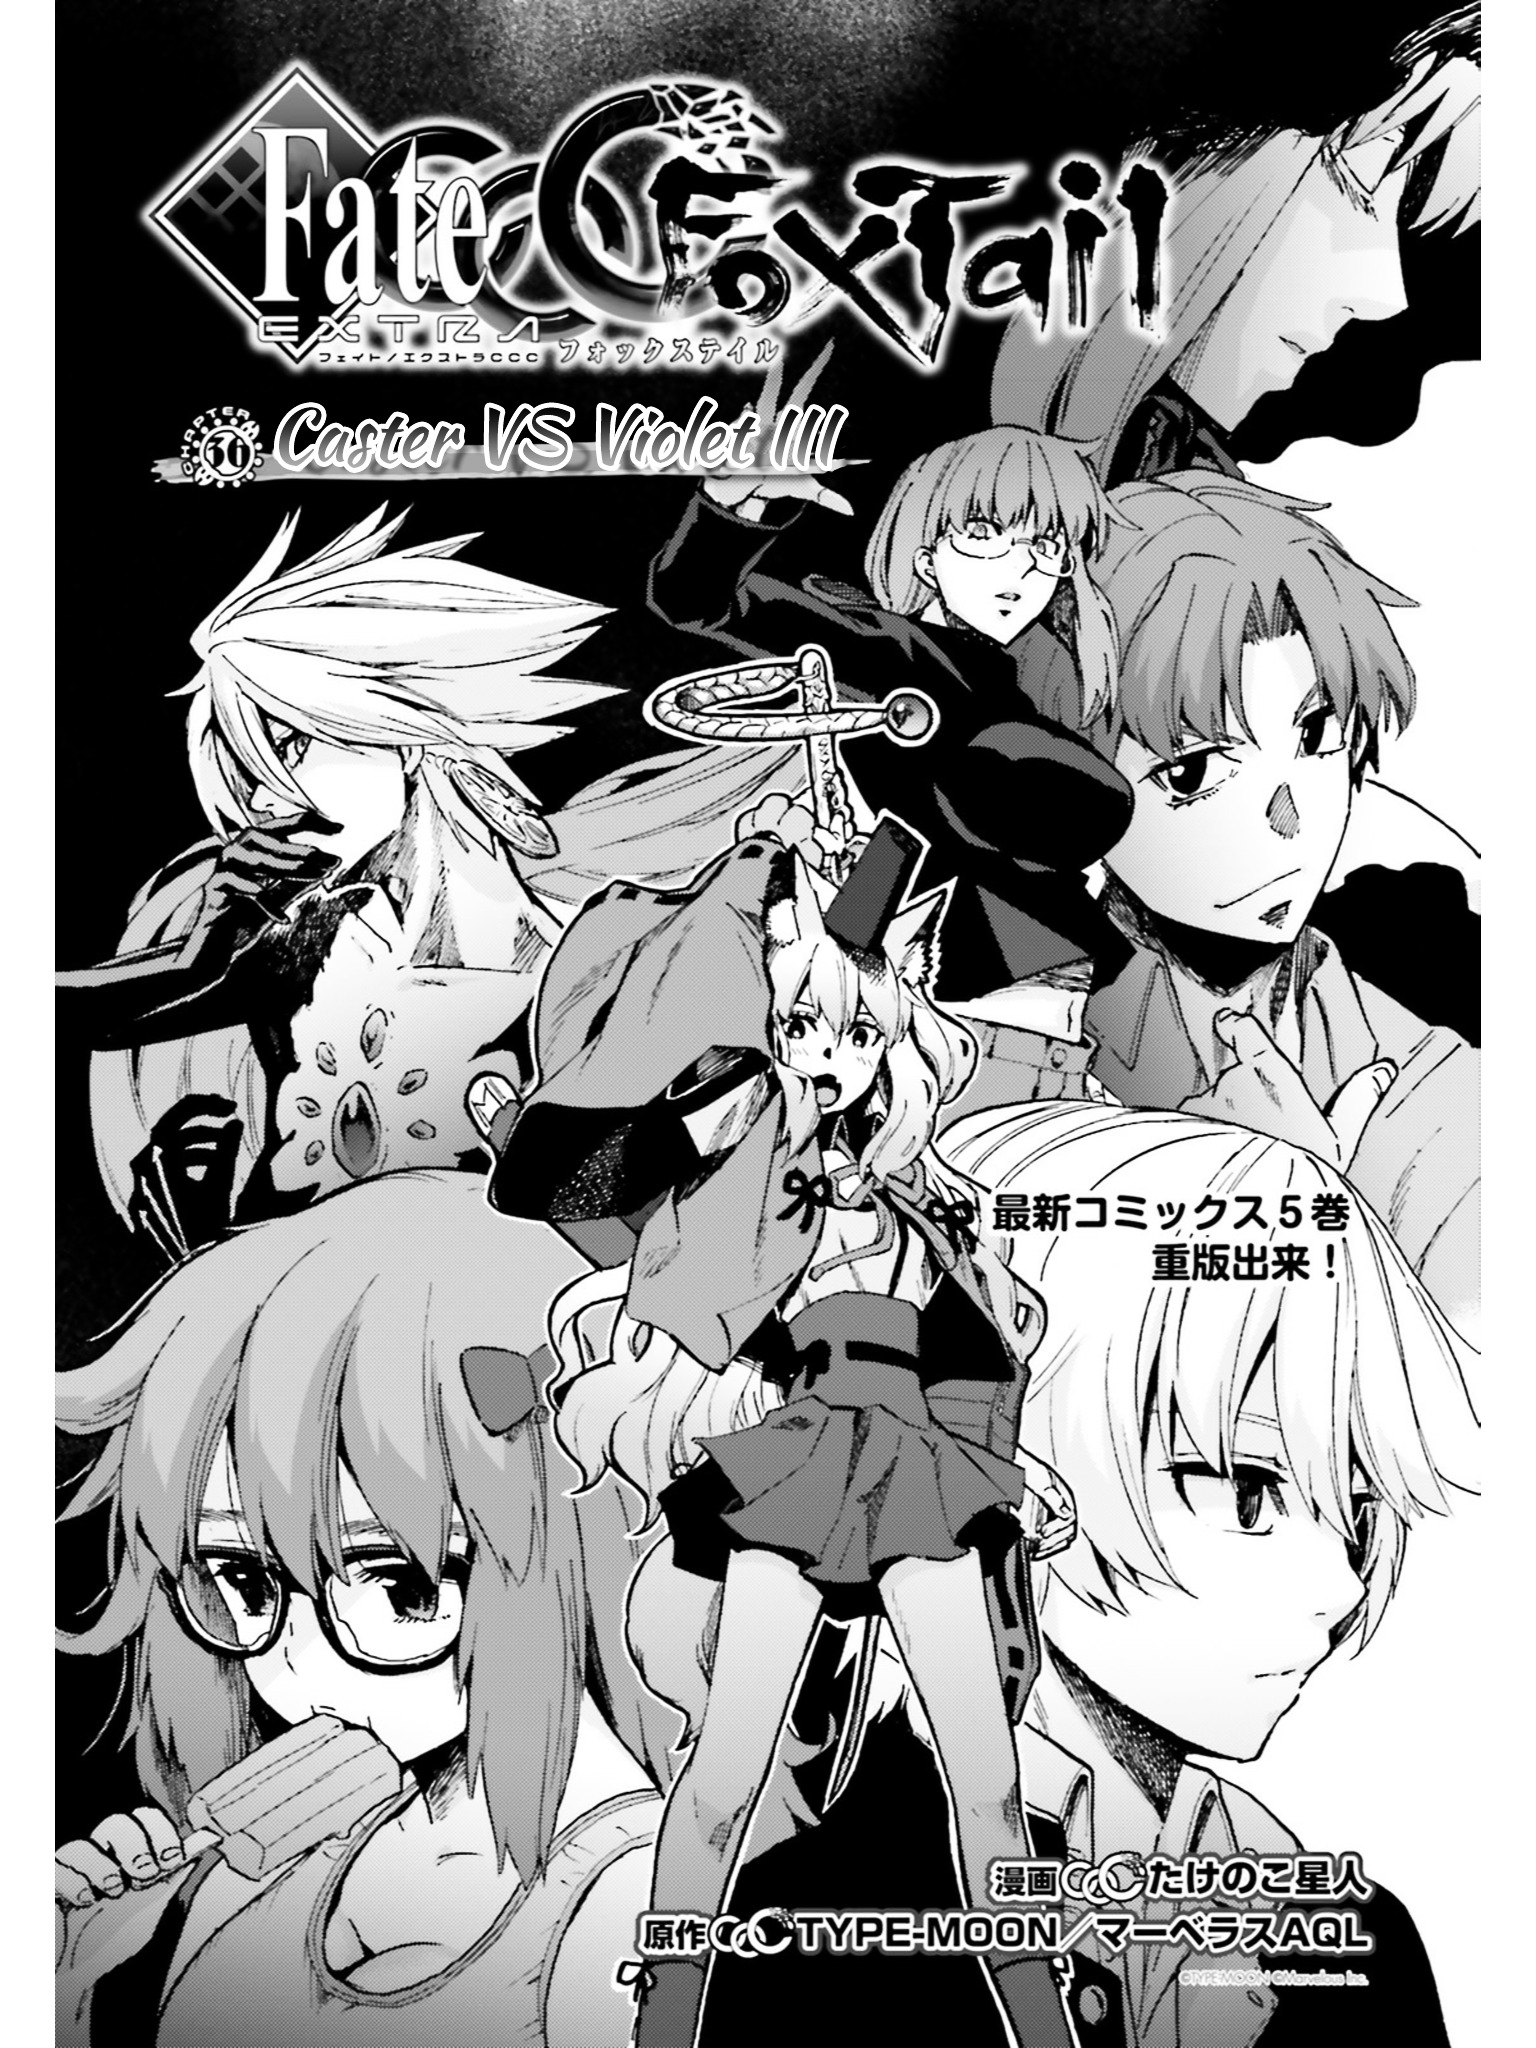 Fate/extra Ccc - Foxtail Vol.6 Chapter 35.1 V2 : Caster Vs Violet 3 - Picture 1